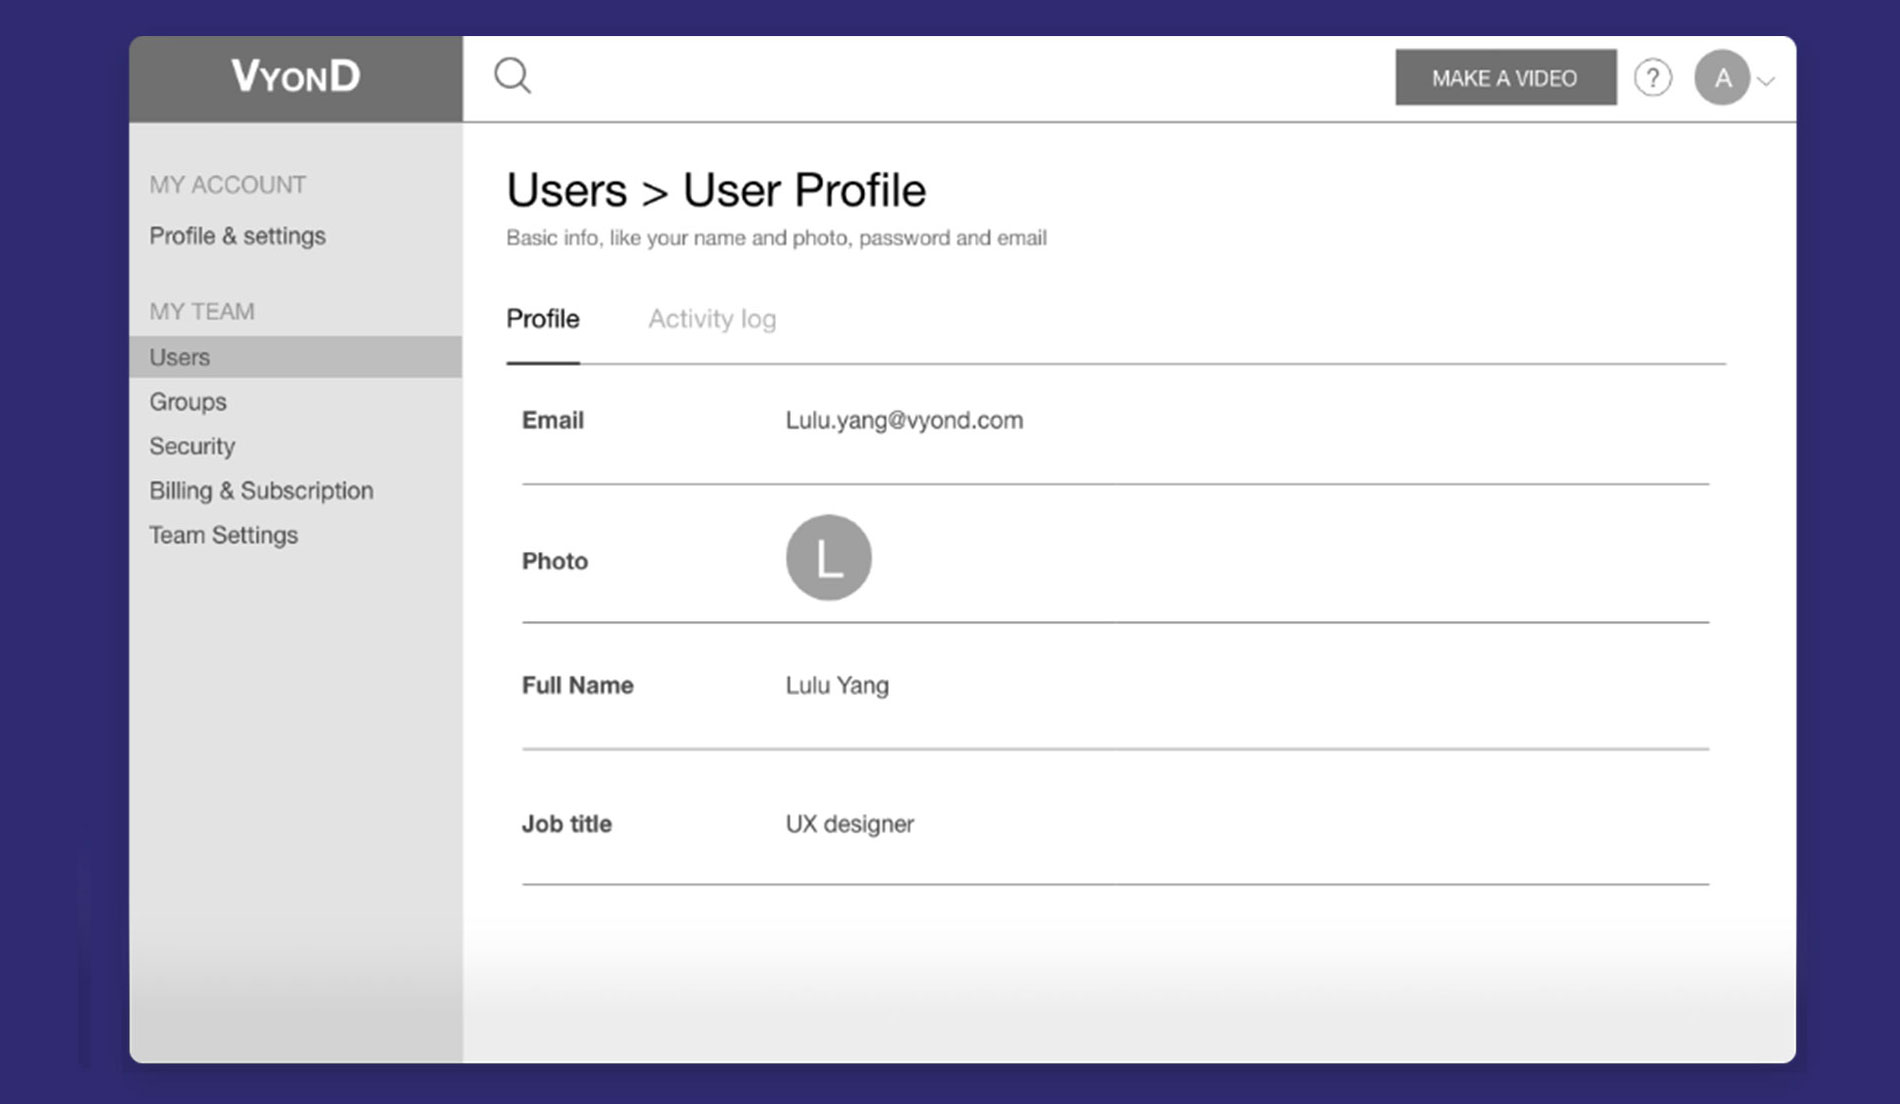 Team administrator could view a member’s profile and activities by going to the “User” category